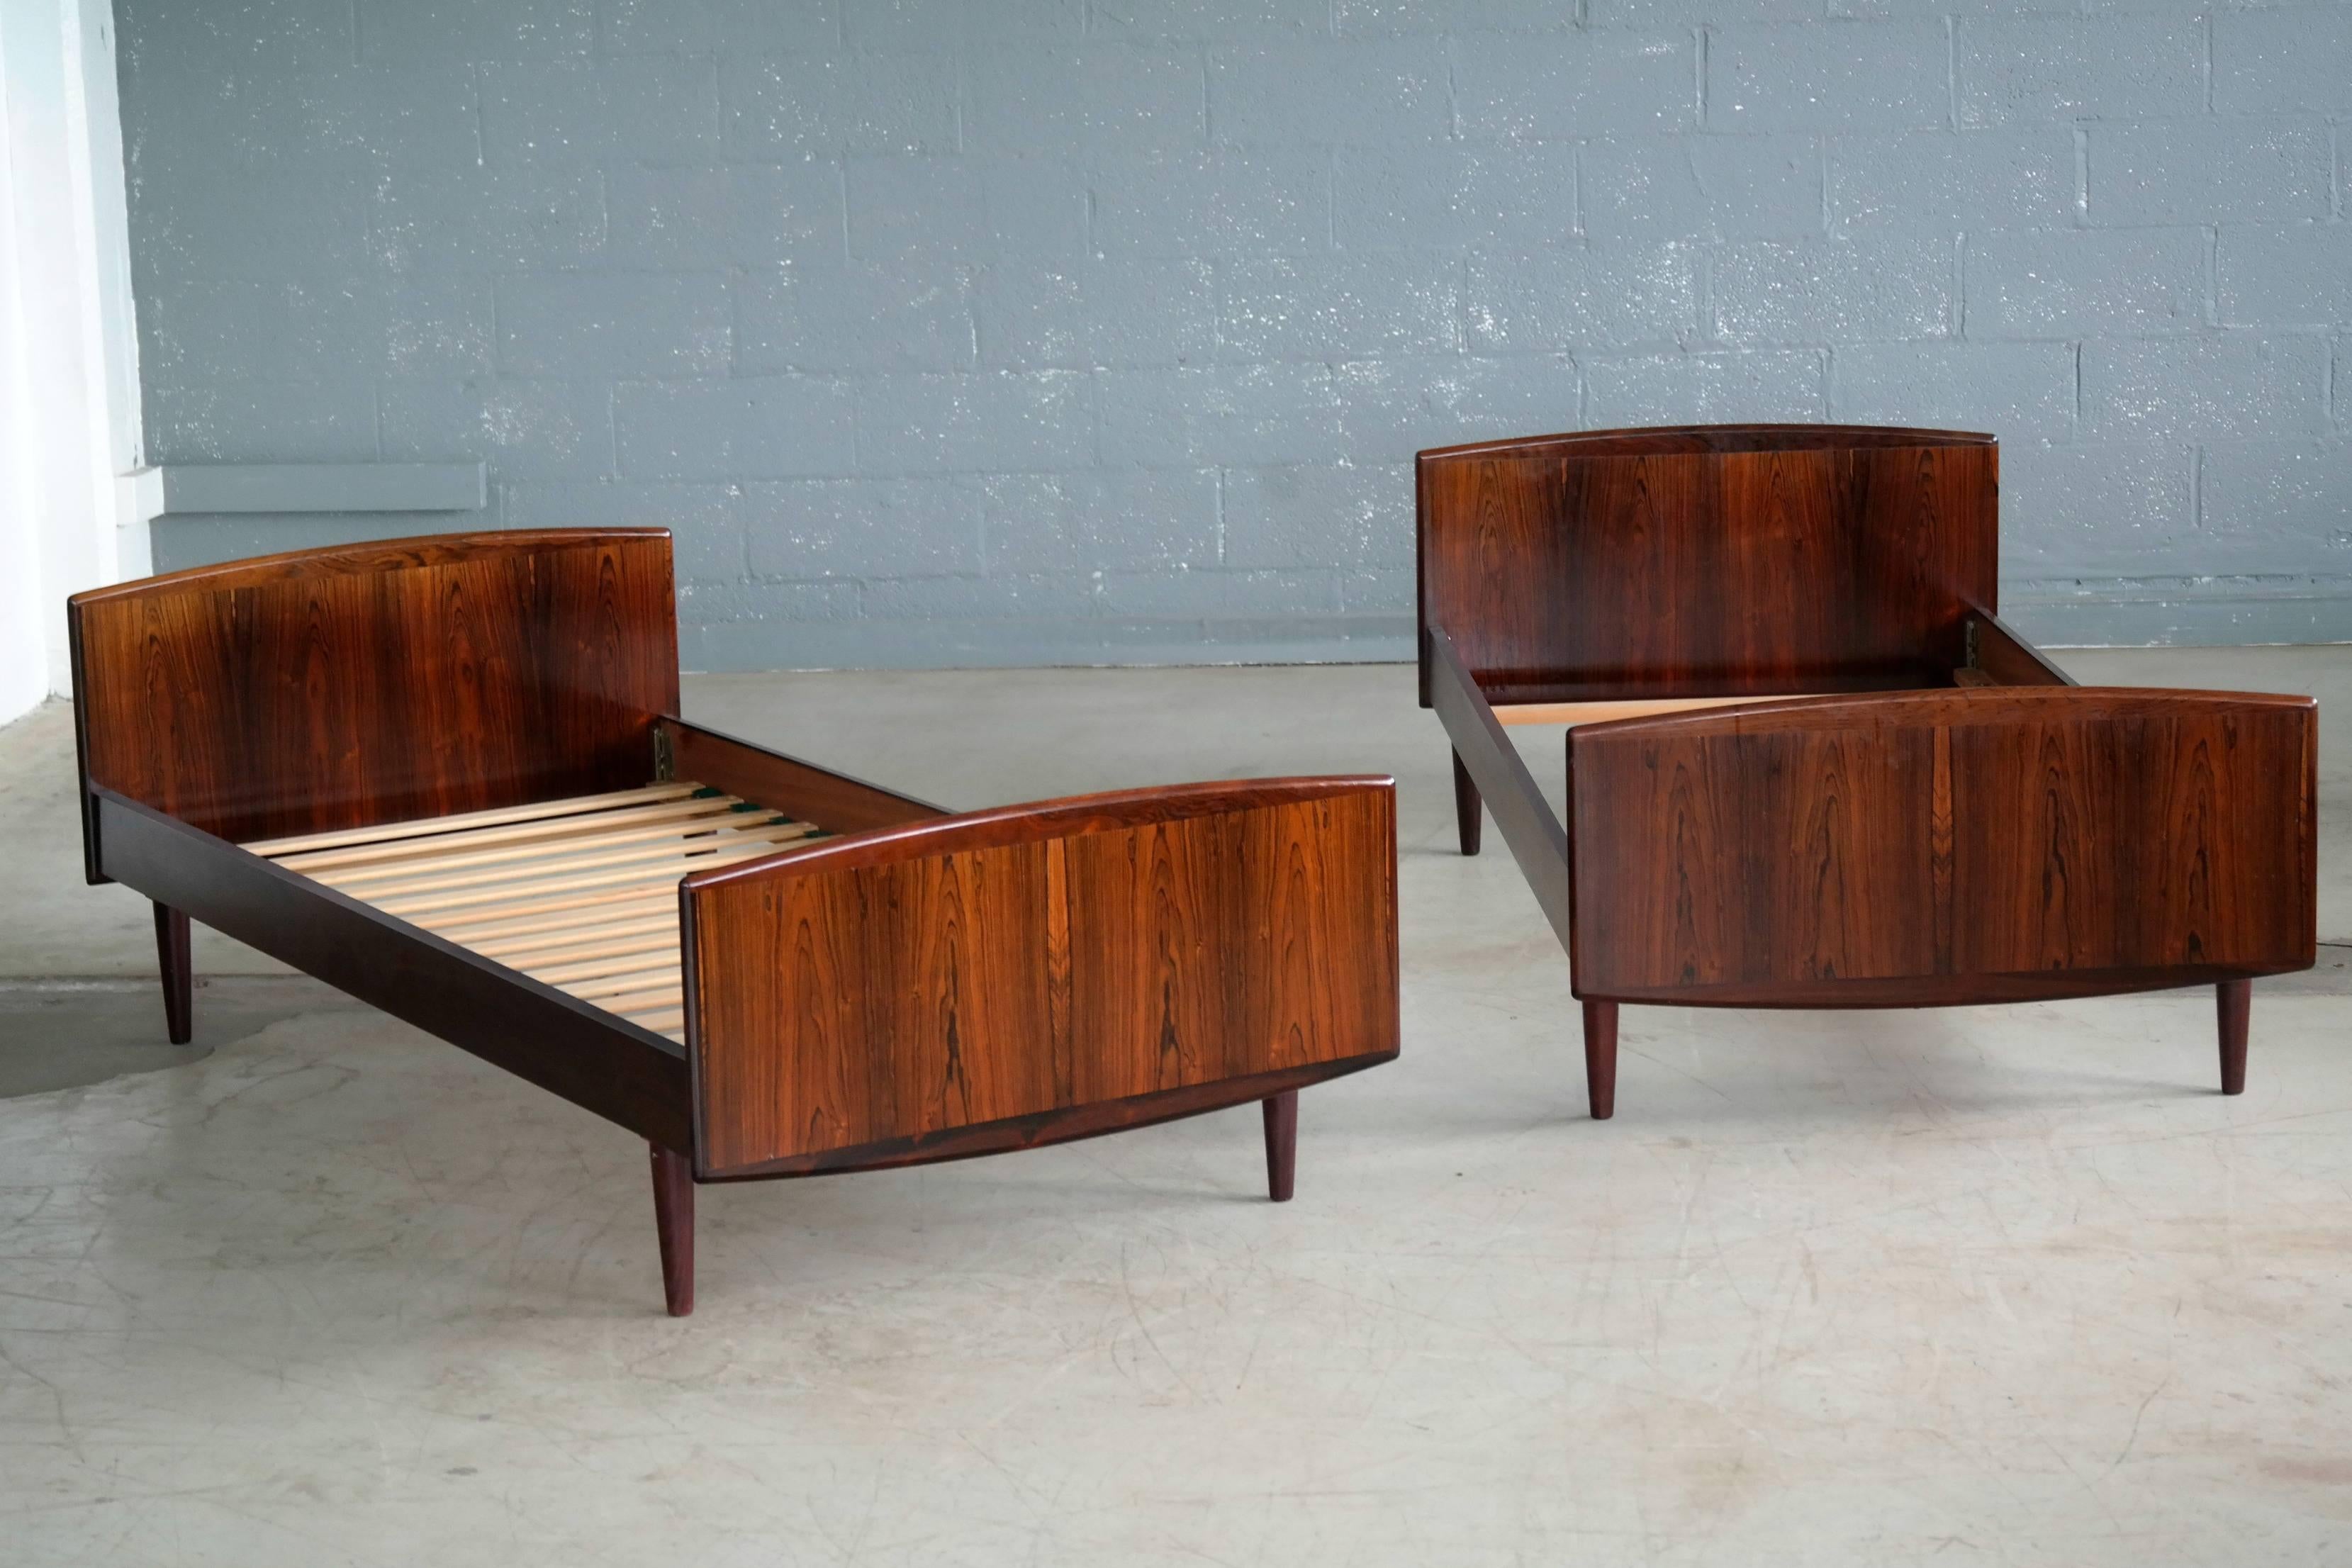 Elegant simple yet very refined pair of guest beds made from beautiful book matched rosewood veneer and thick edges in solid rosewood. Made by Sannemanns Moebelfabrik in Denmark, circa late 1950s. Perfect for the guestroom. Near perfect condition